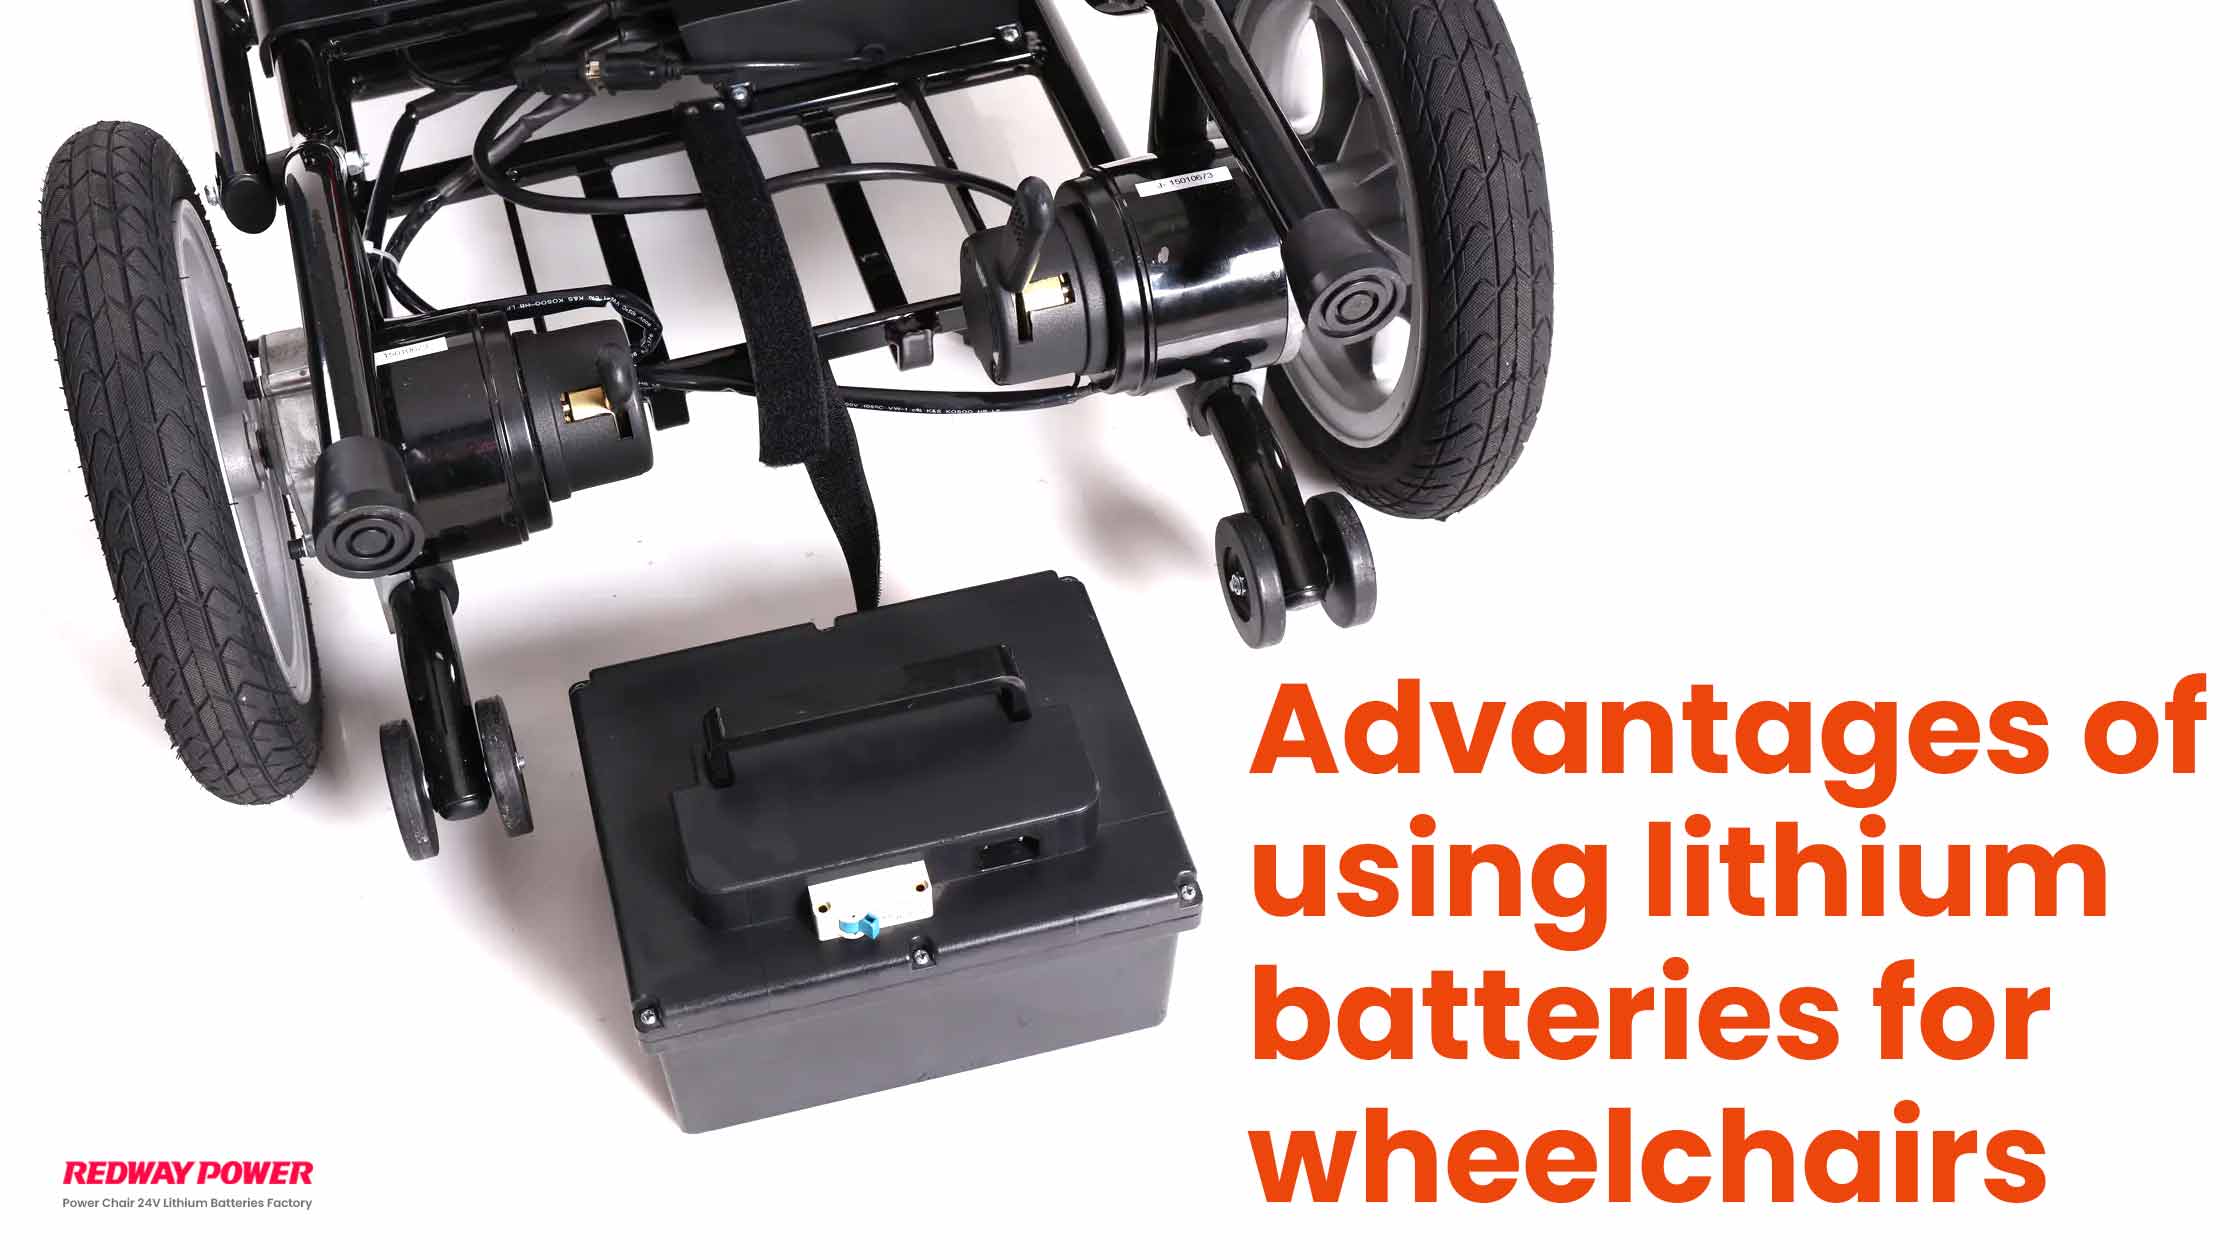 Advantages of using lithium batteries for wheelchairs, Advantages of using lithium batteries for wheelchairs